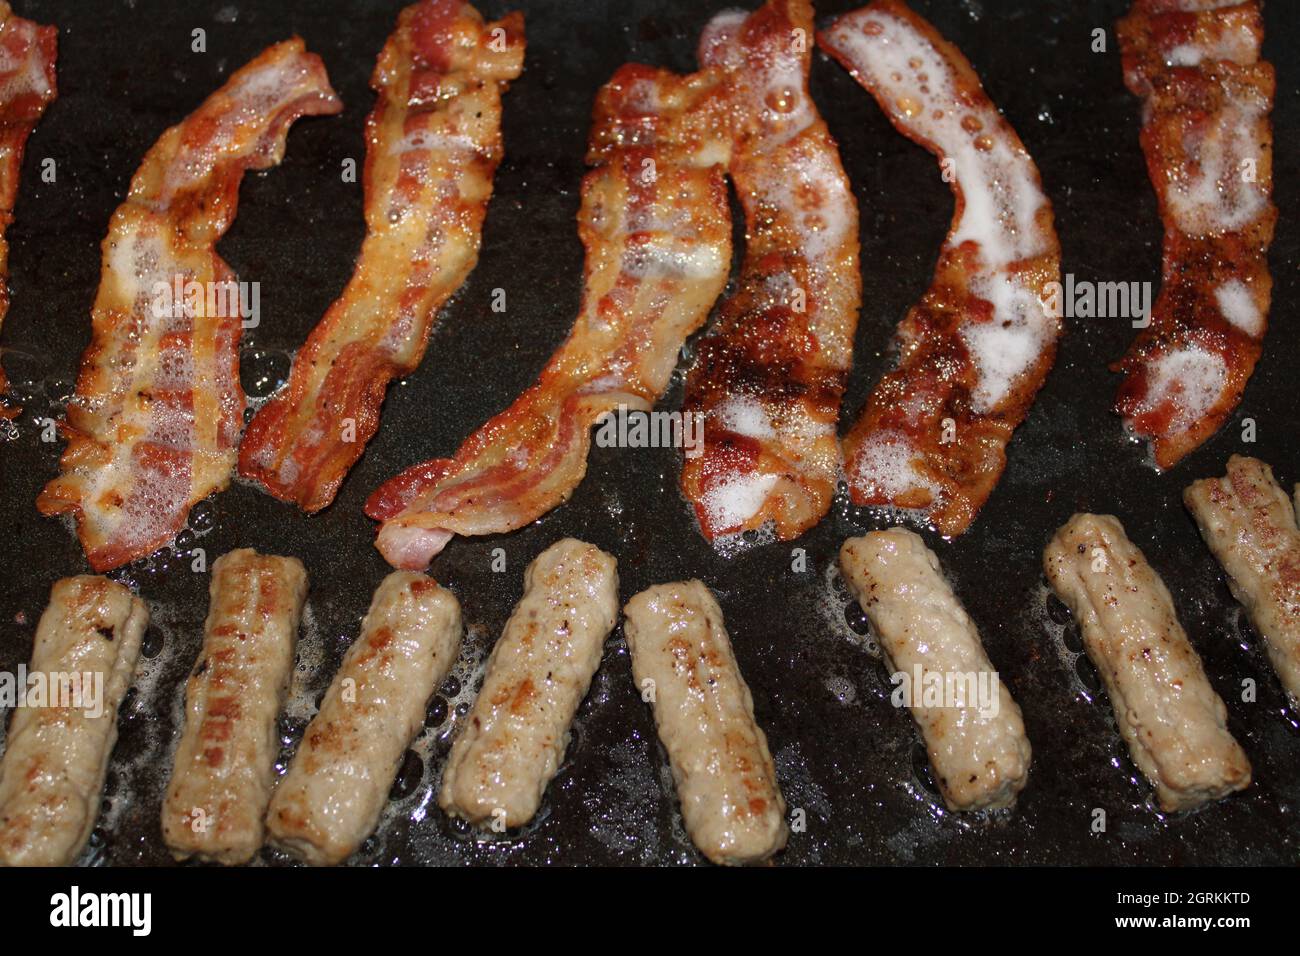 Bacon and sausage cooking on a griddle. Stock Photo